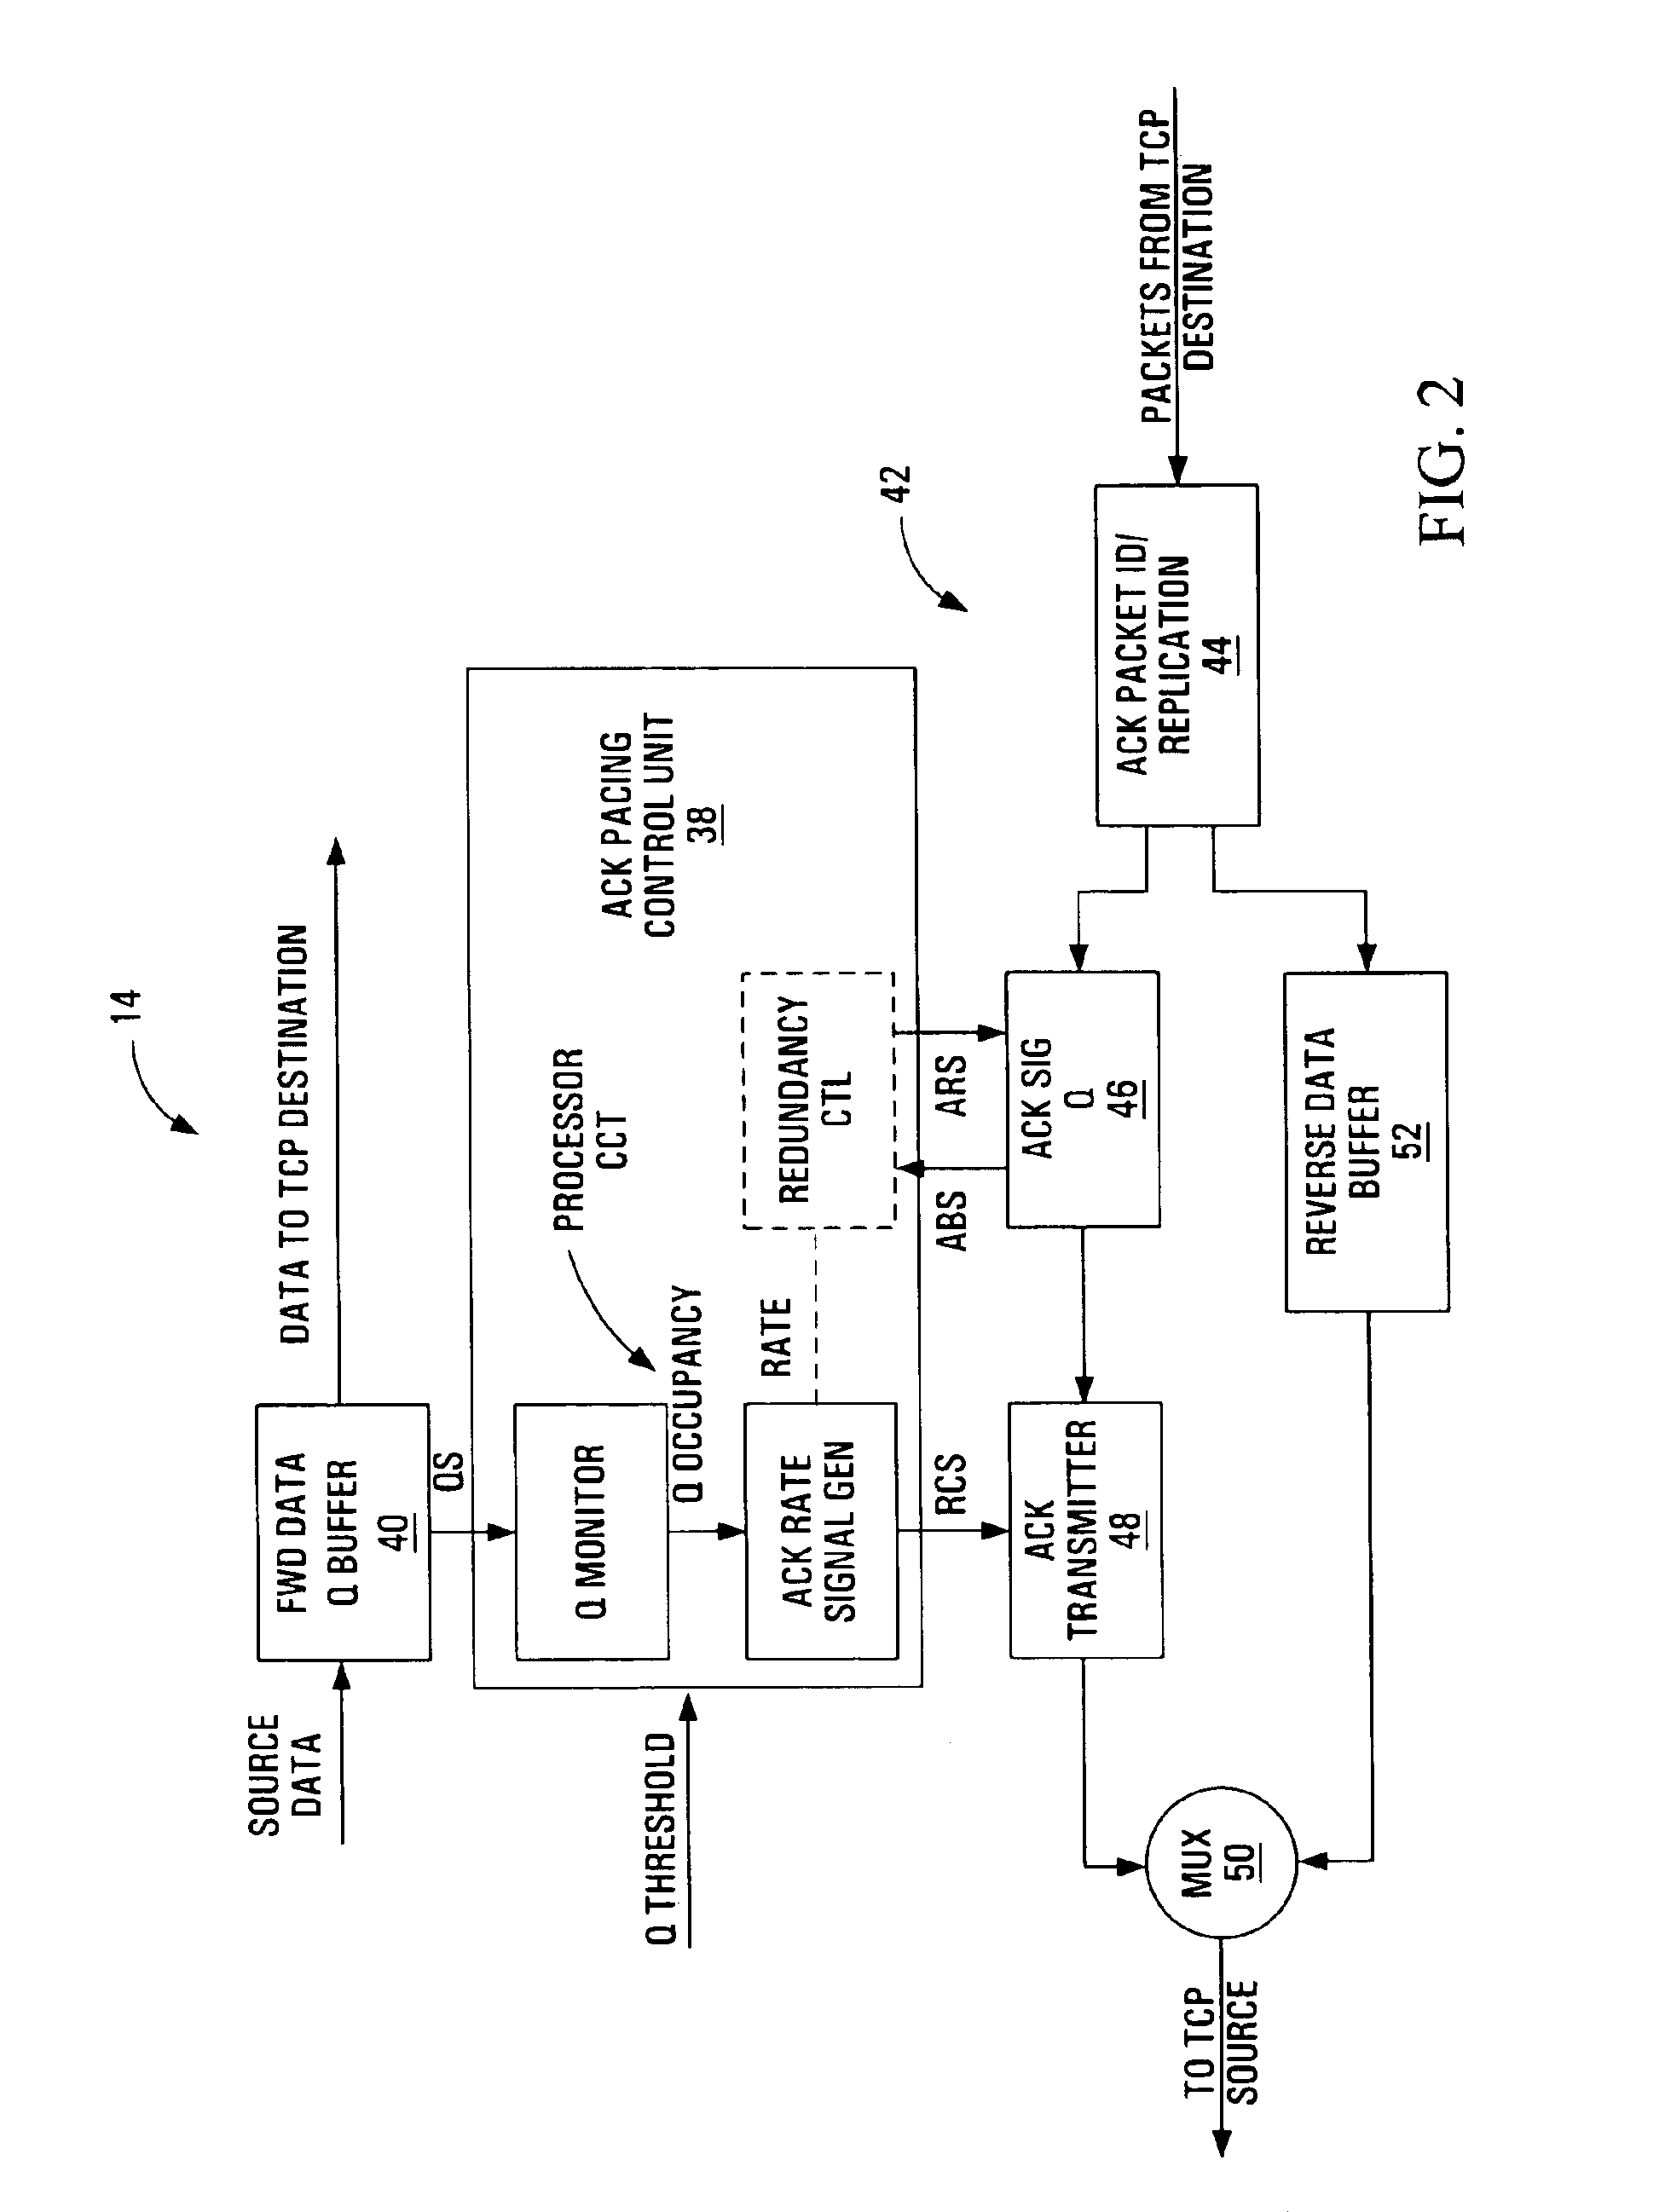 Method, apparatus, media, and signals for controlling packet transmission rate from a packet source